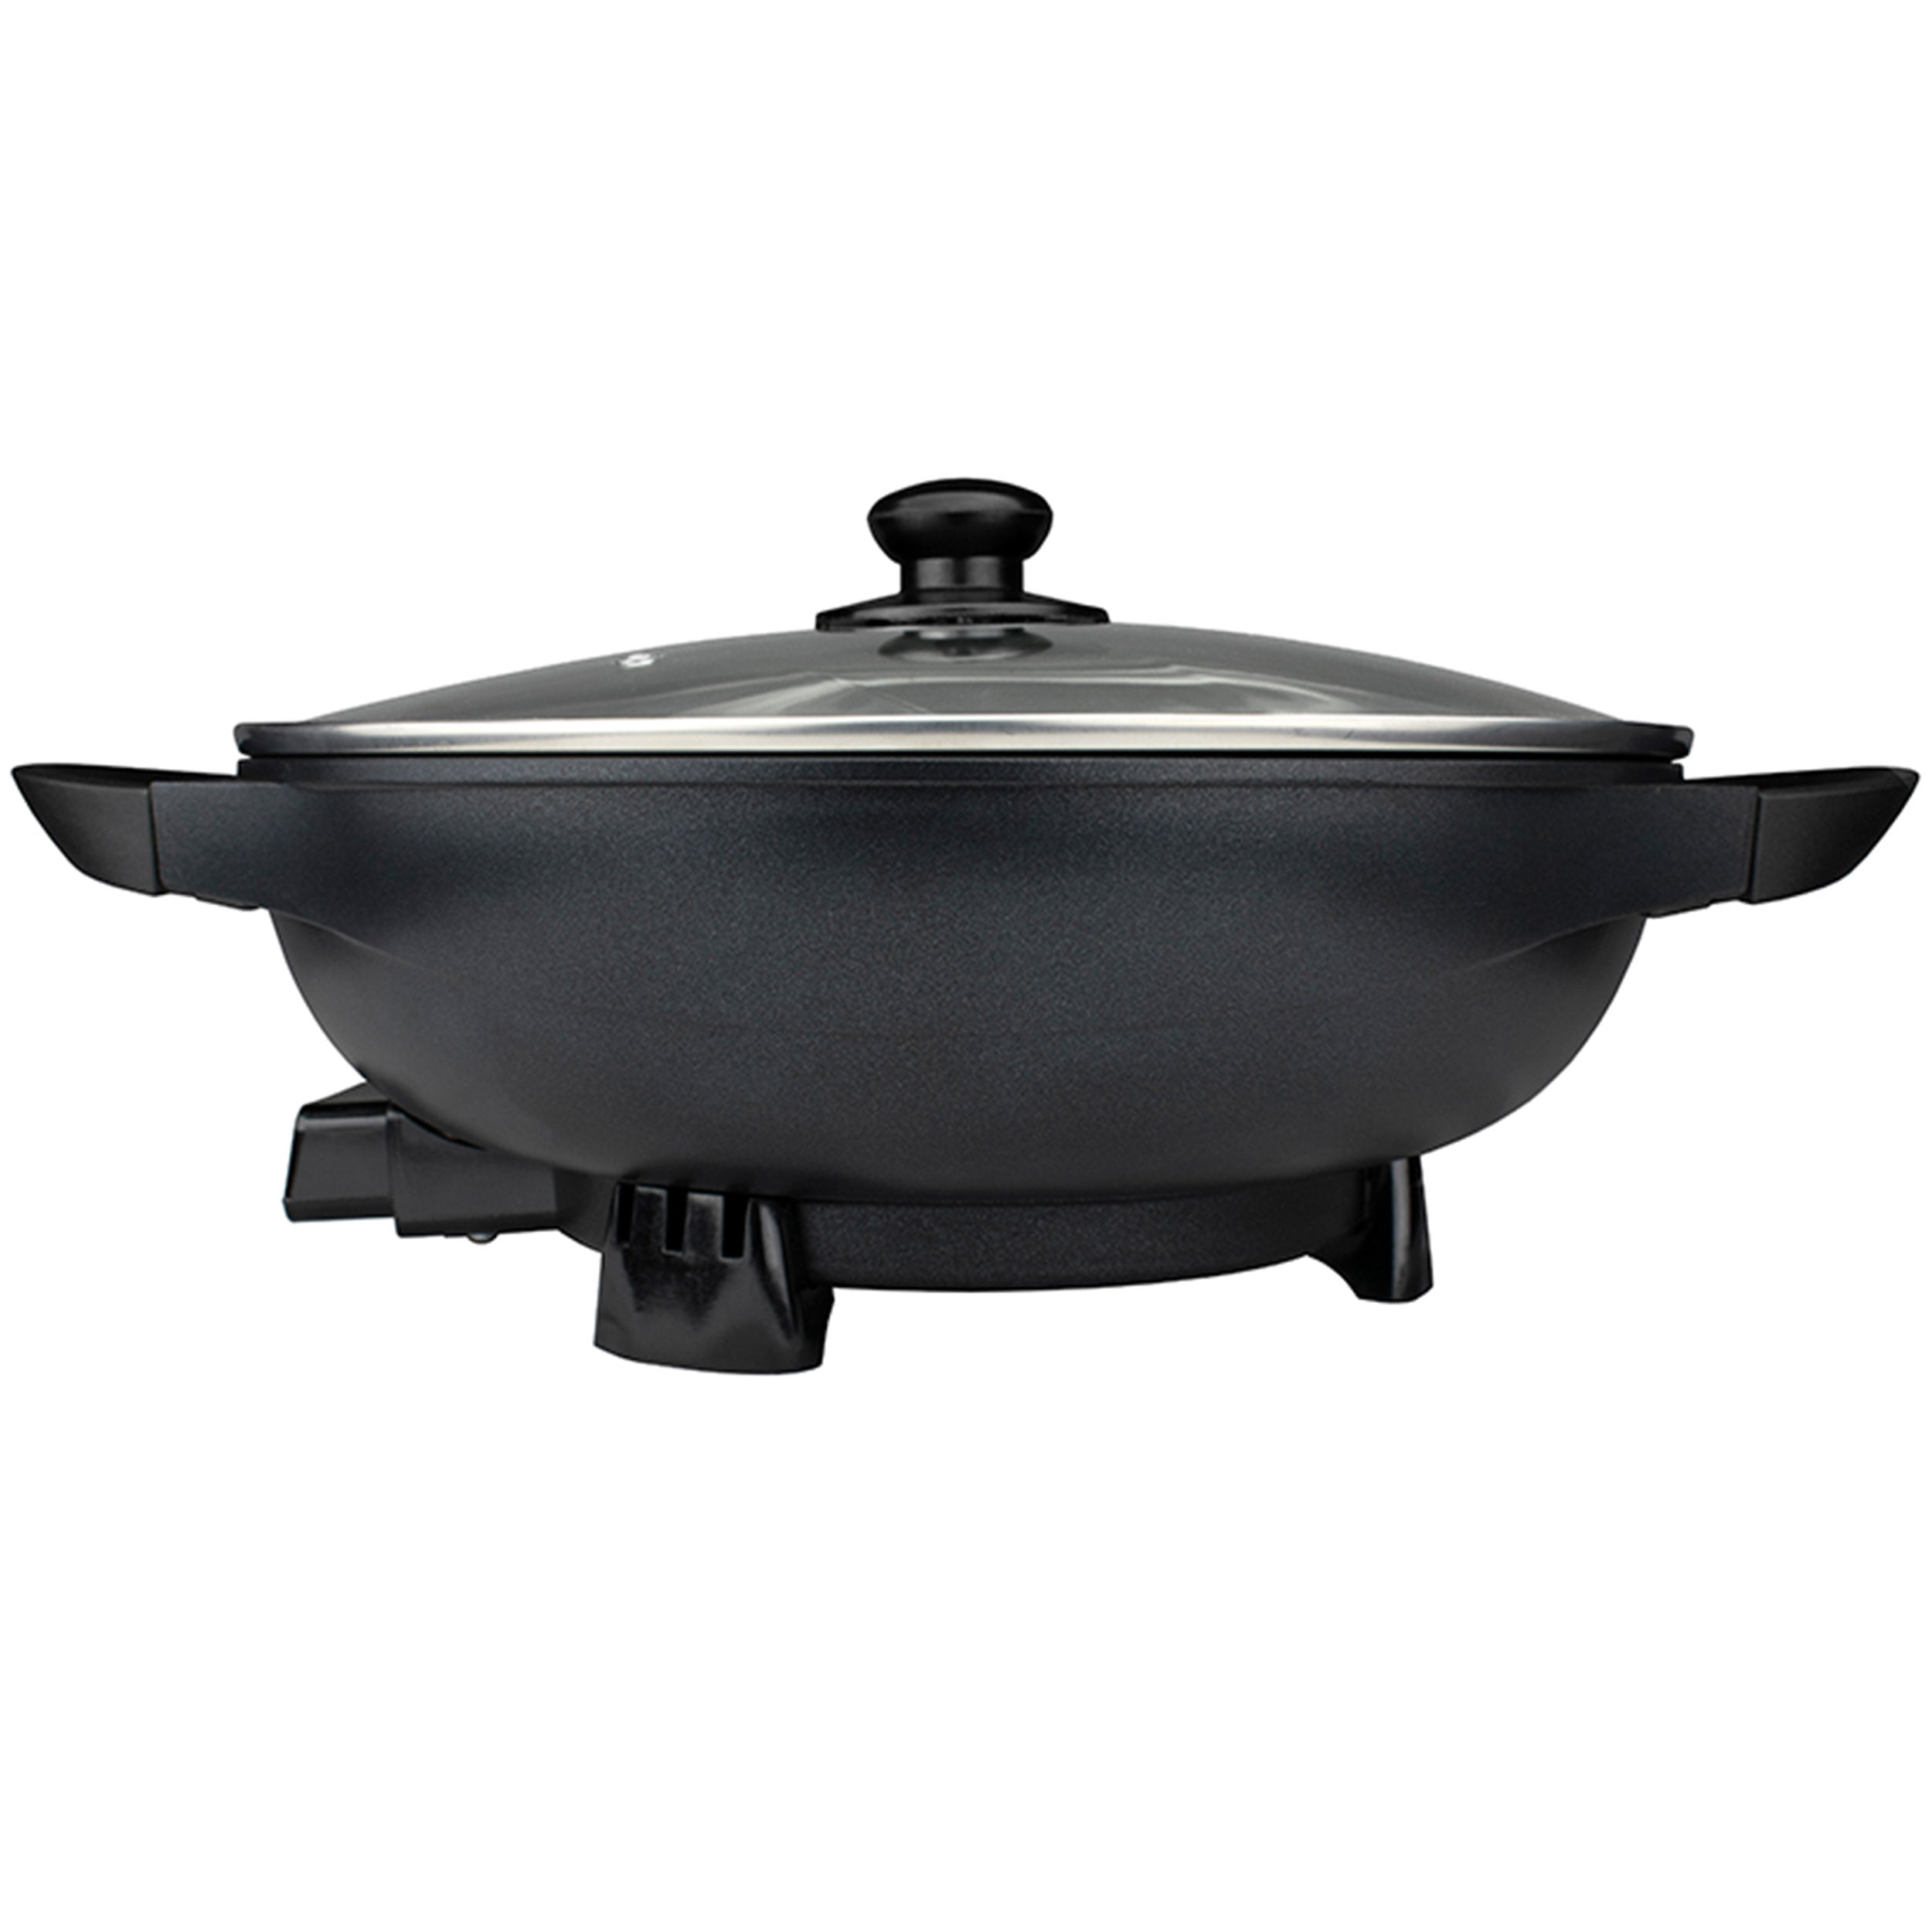 Large Heavy Duty Nonstick w/ Lid Kitchen Dining Cookware Details about   Electric Wok 7 Qt 